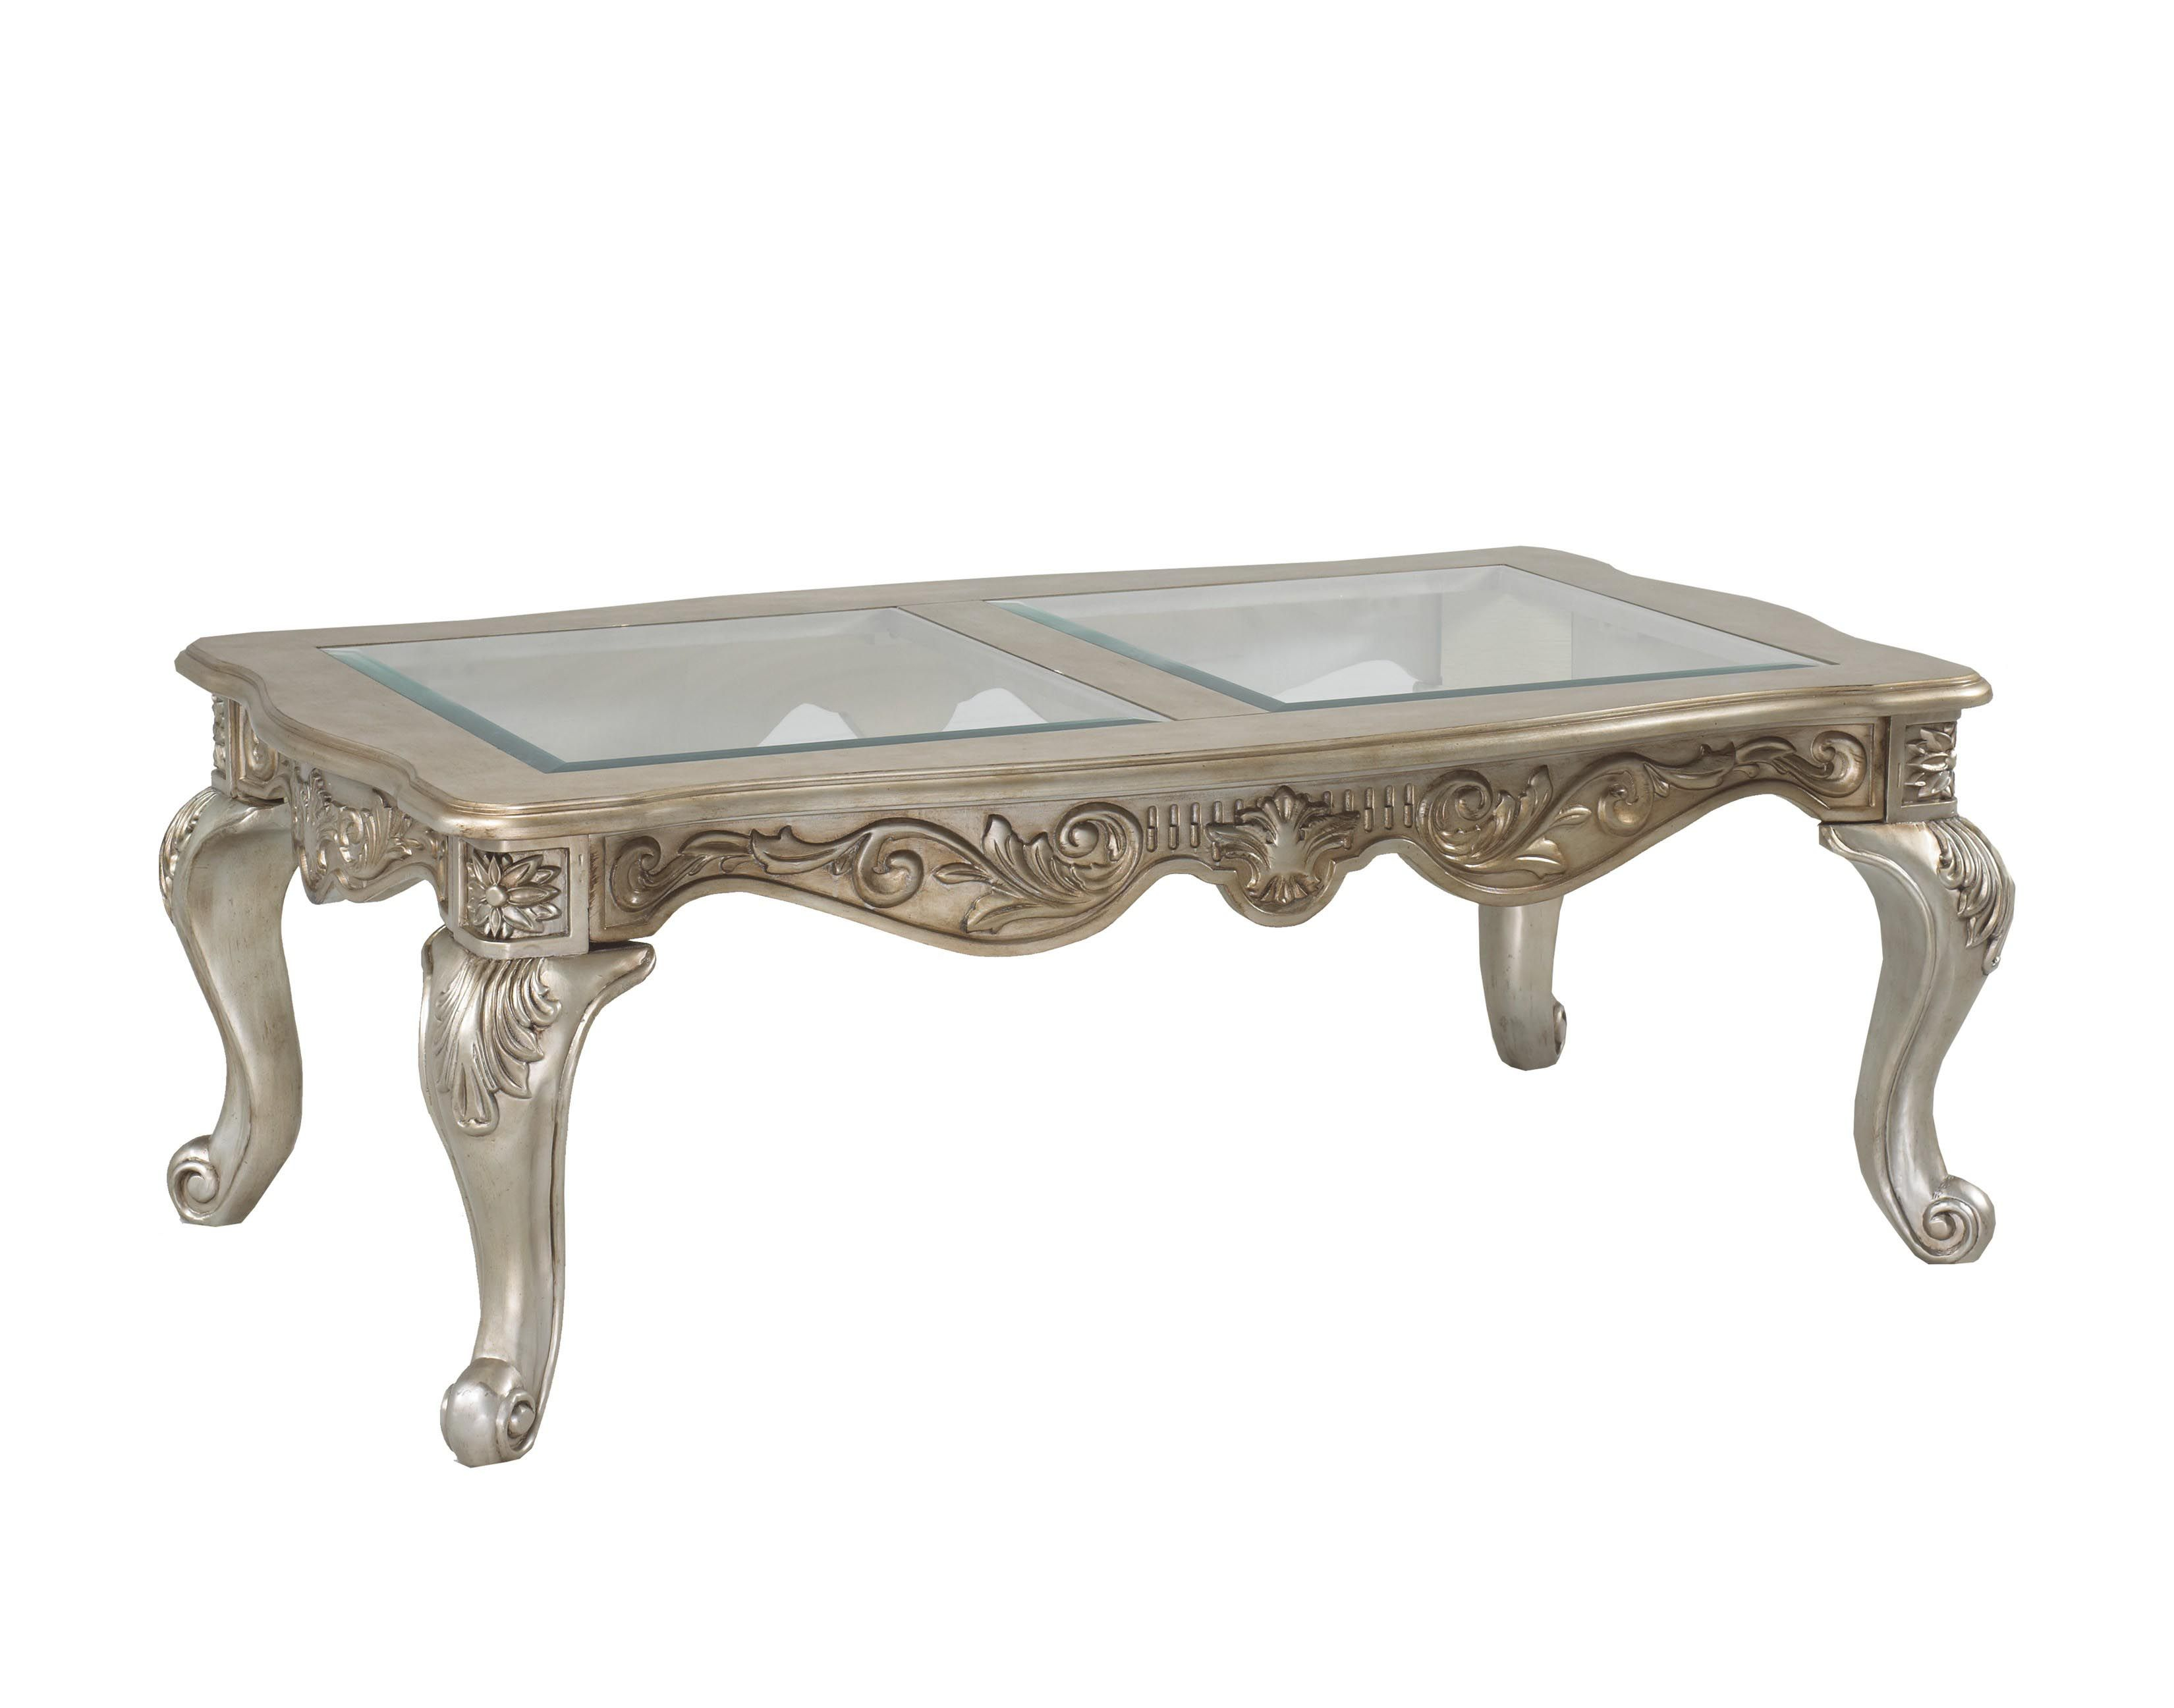 Antique Silver Coffee Table Coffee Tables In 2019 Silver Coffee pertaining to dimensions 3300 X 2593